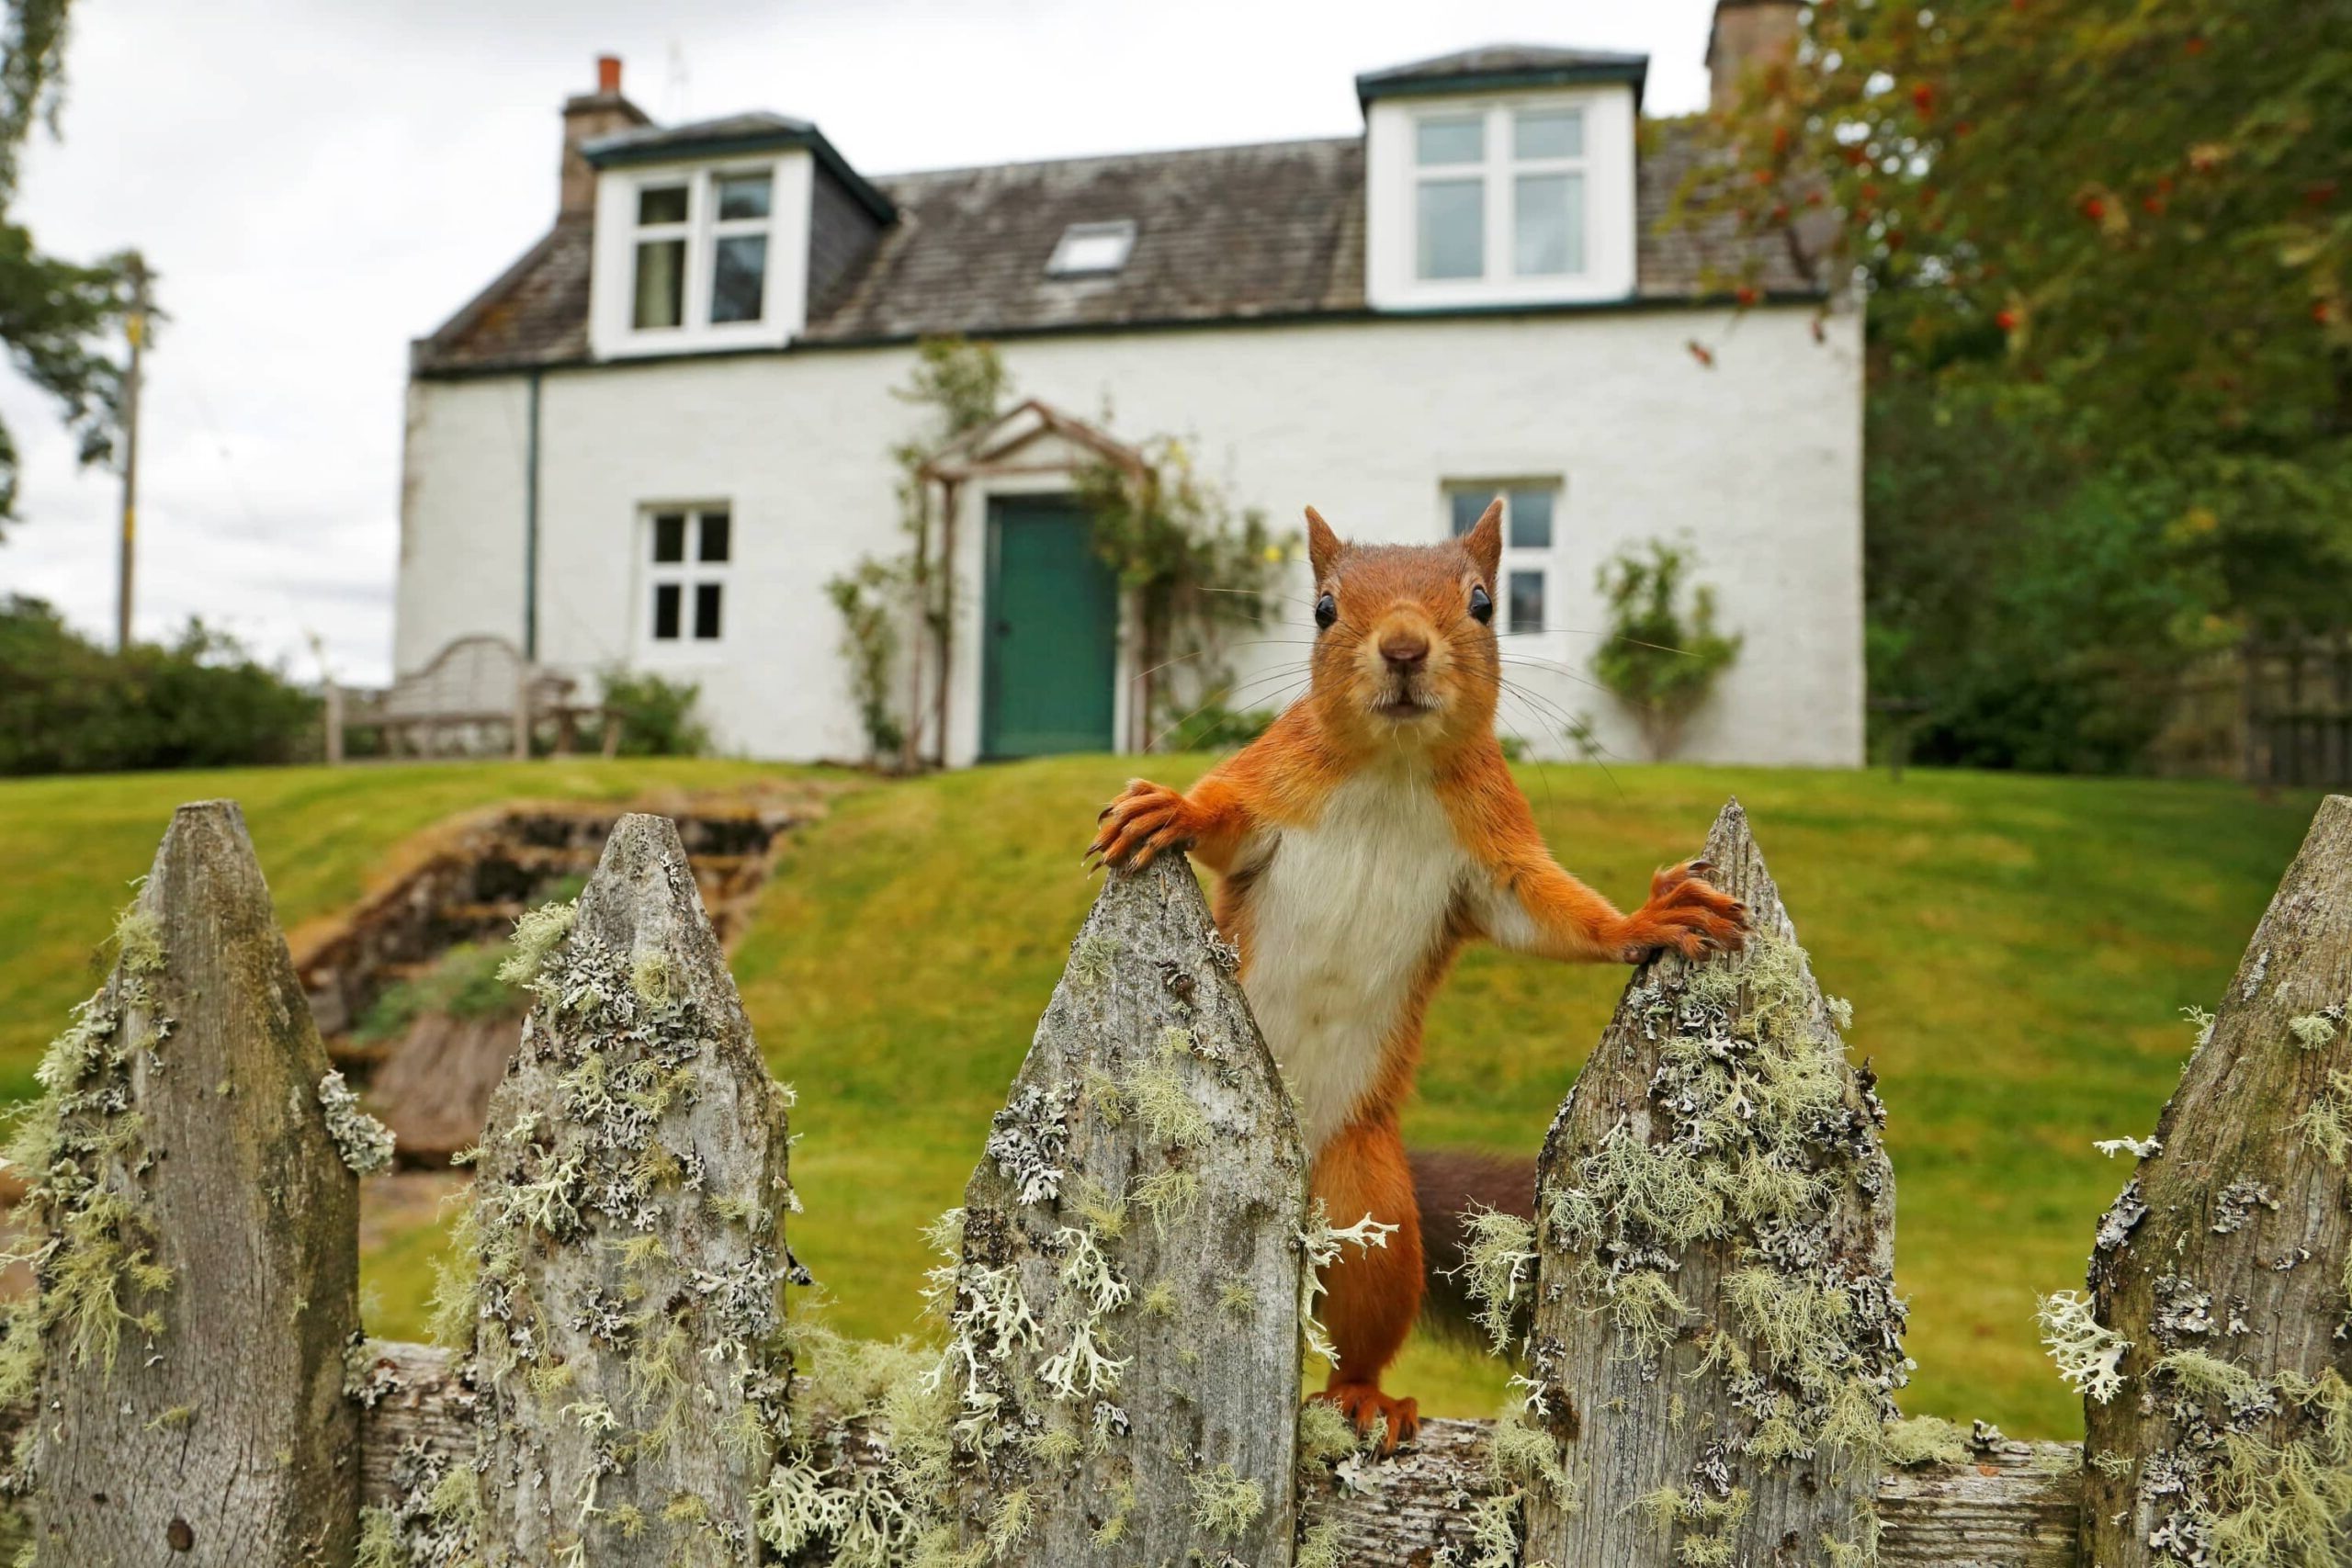 RED SQUIRREL NEIL MCINTYRE - People's Trust for Endangered Species